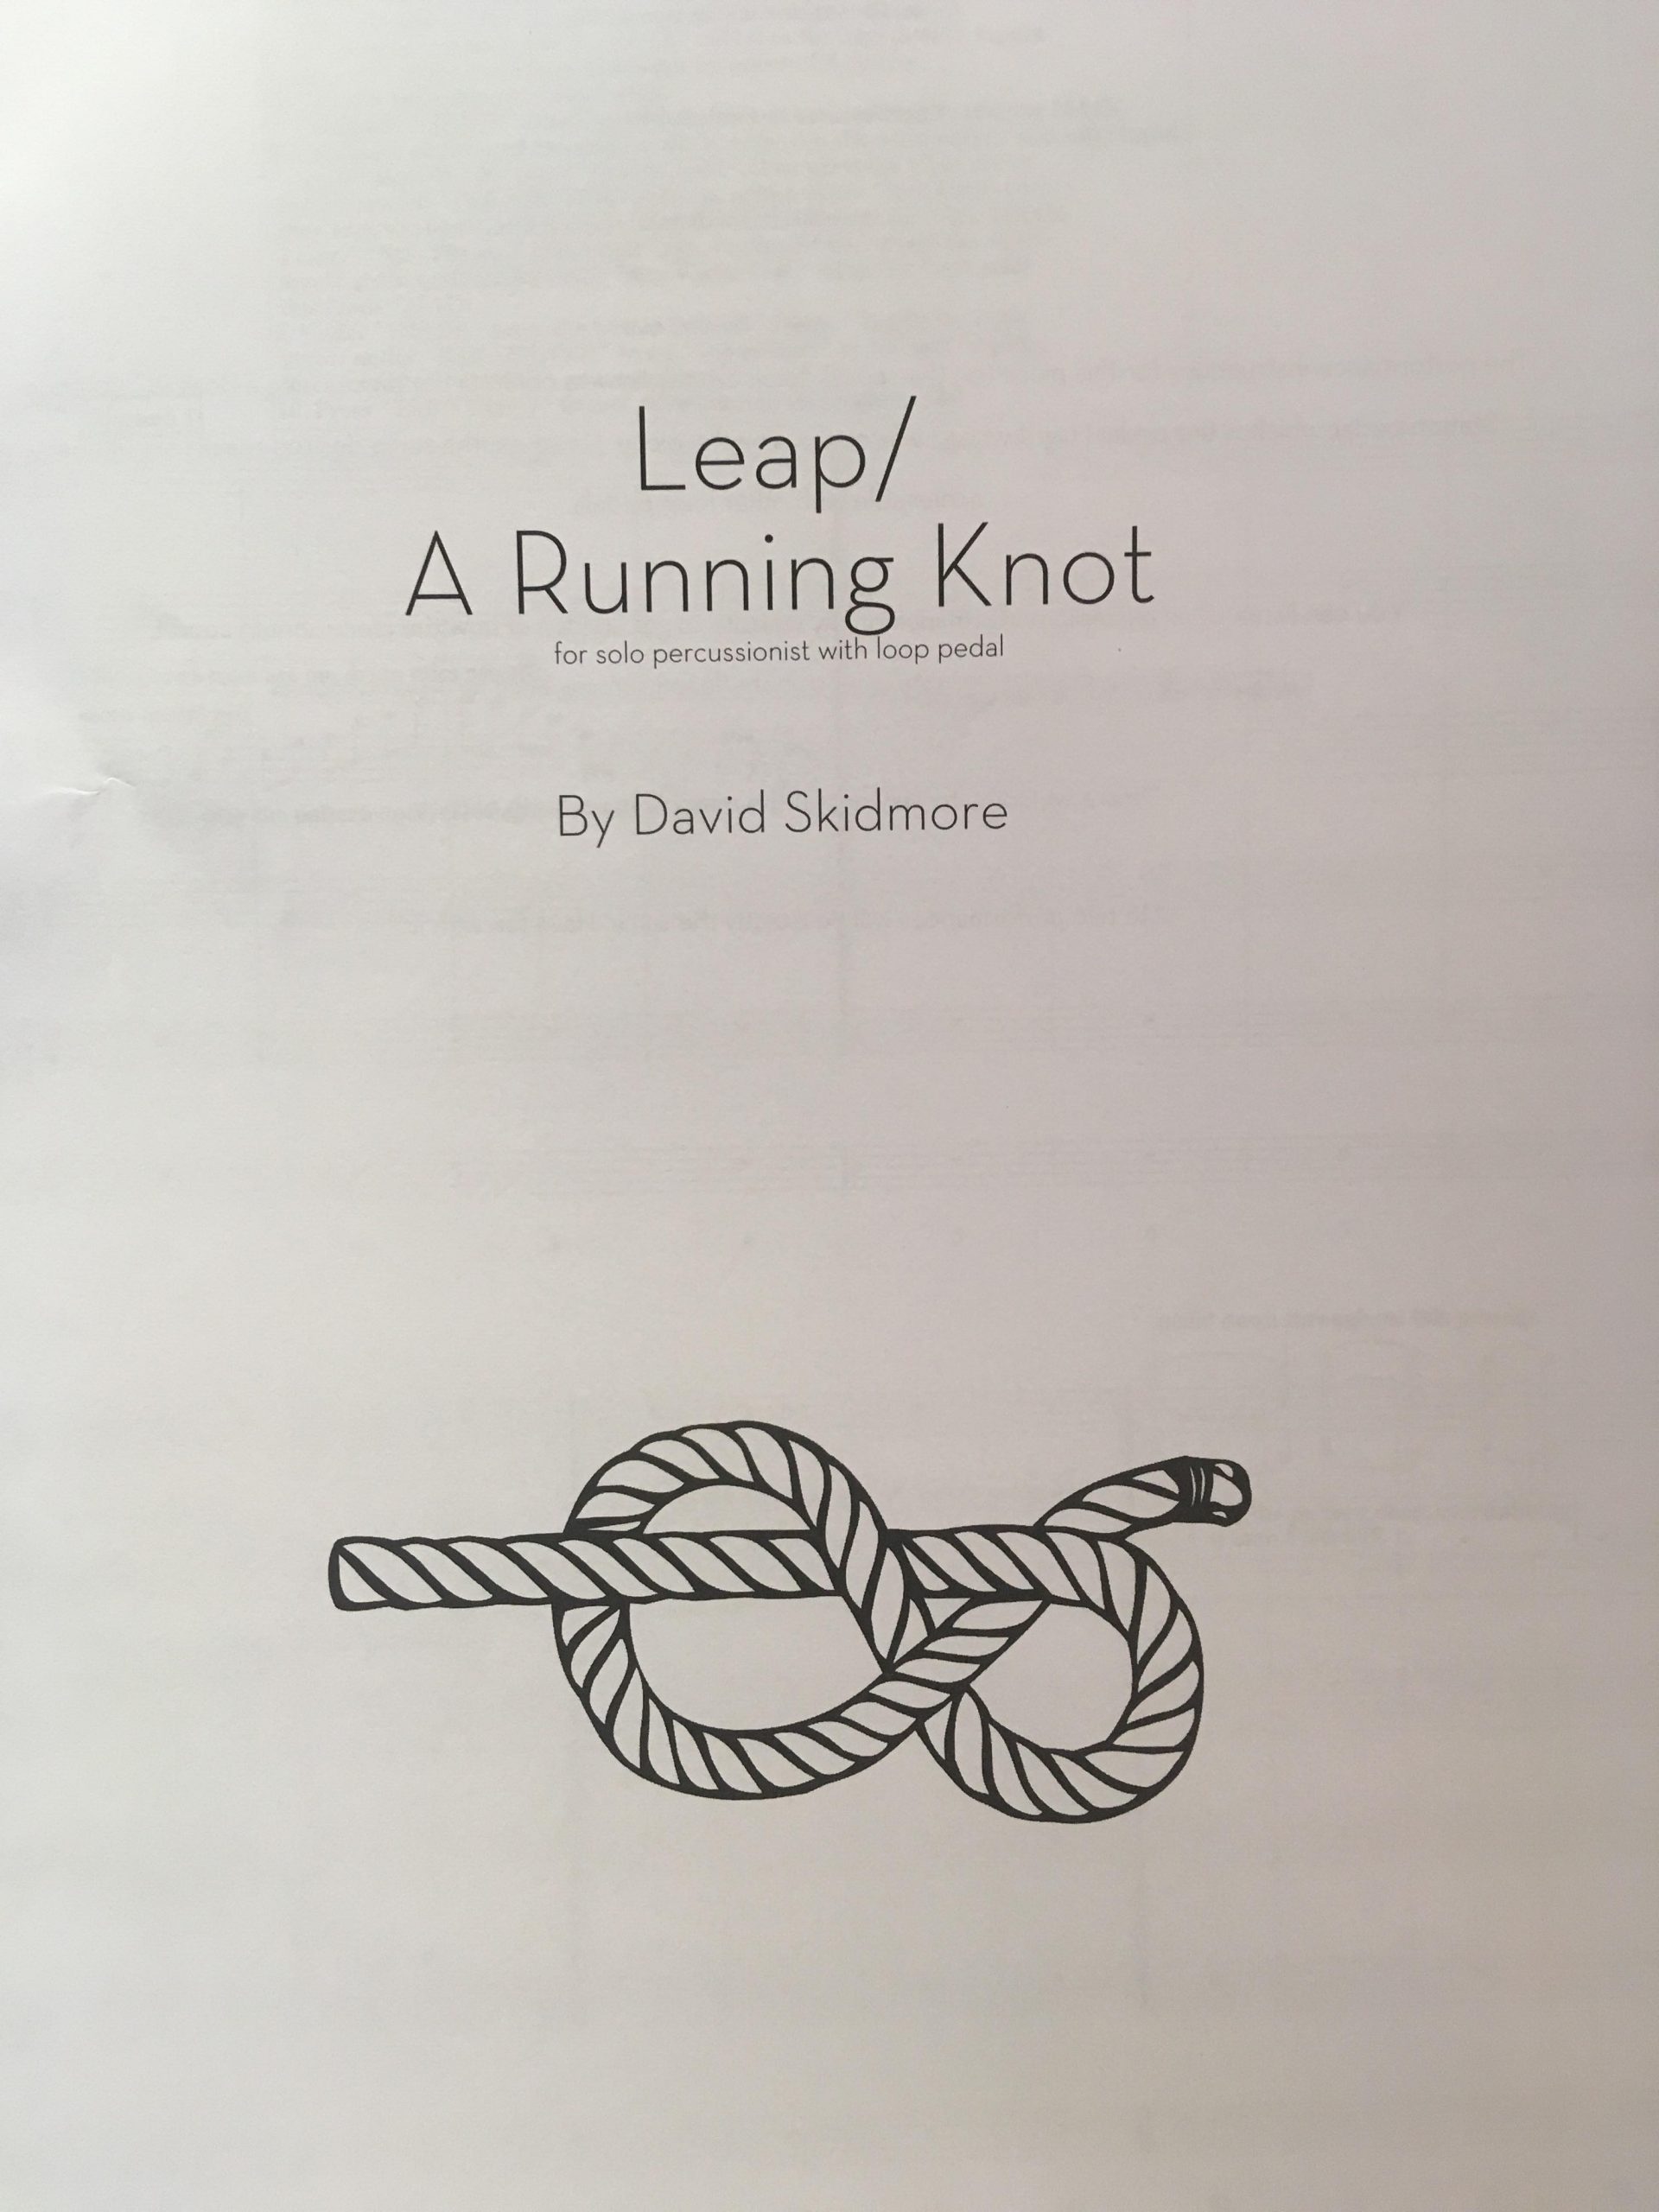 Leap / A Running Knot by David Skidmore